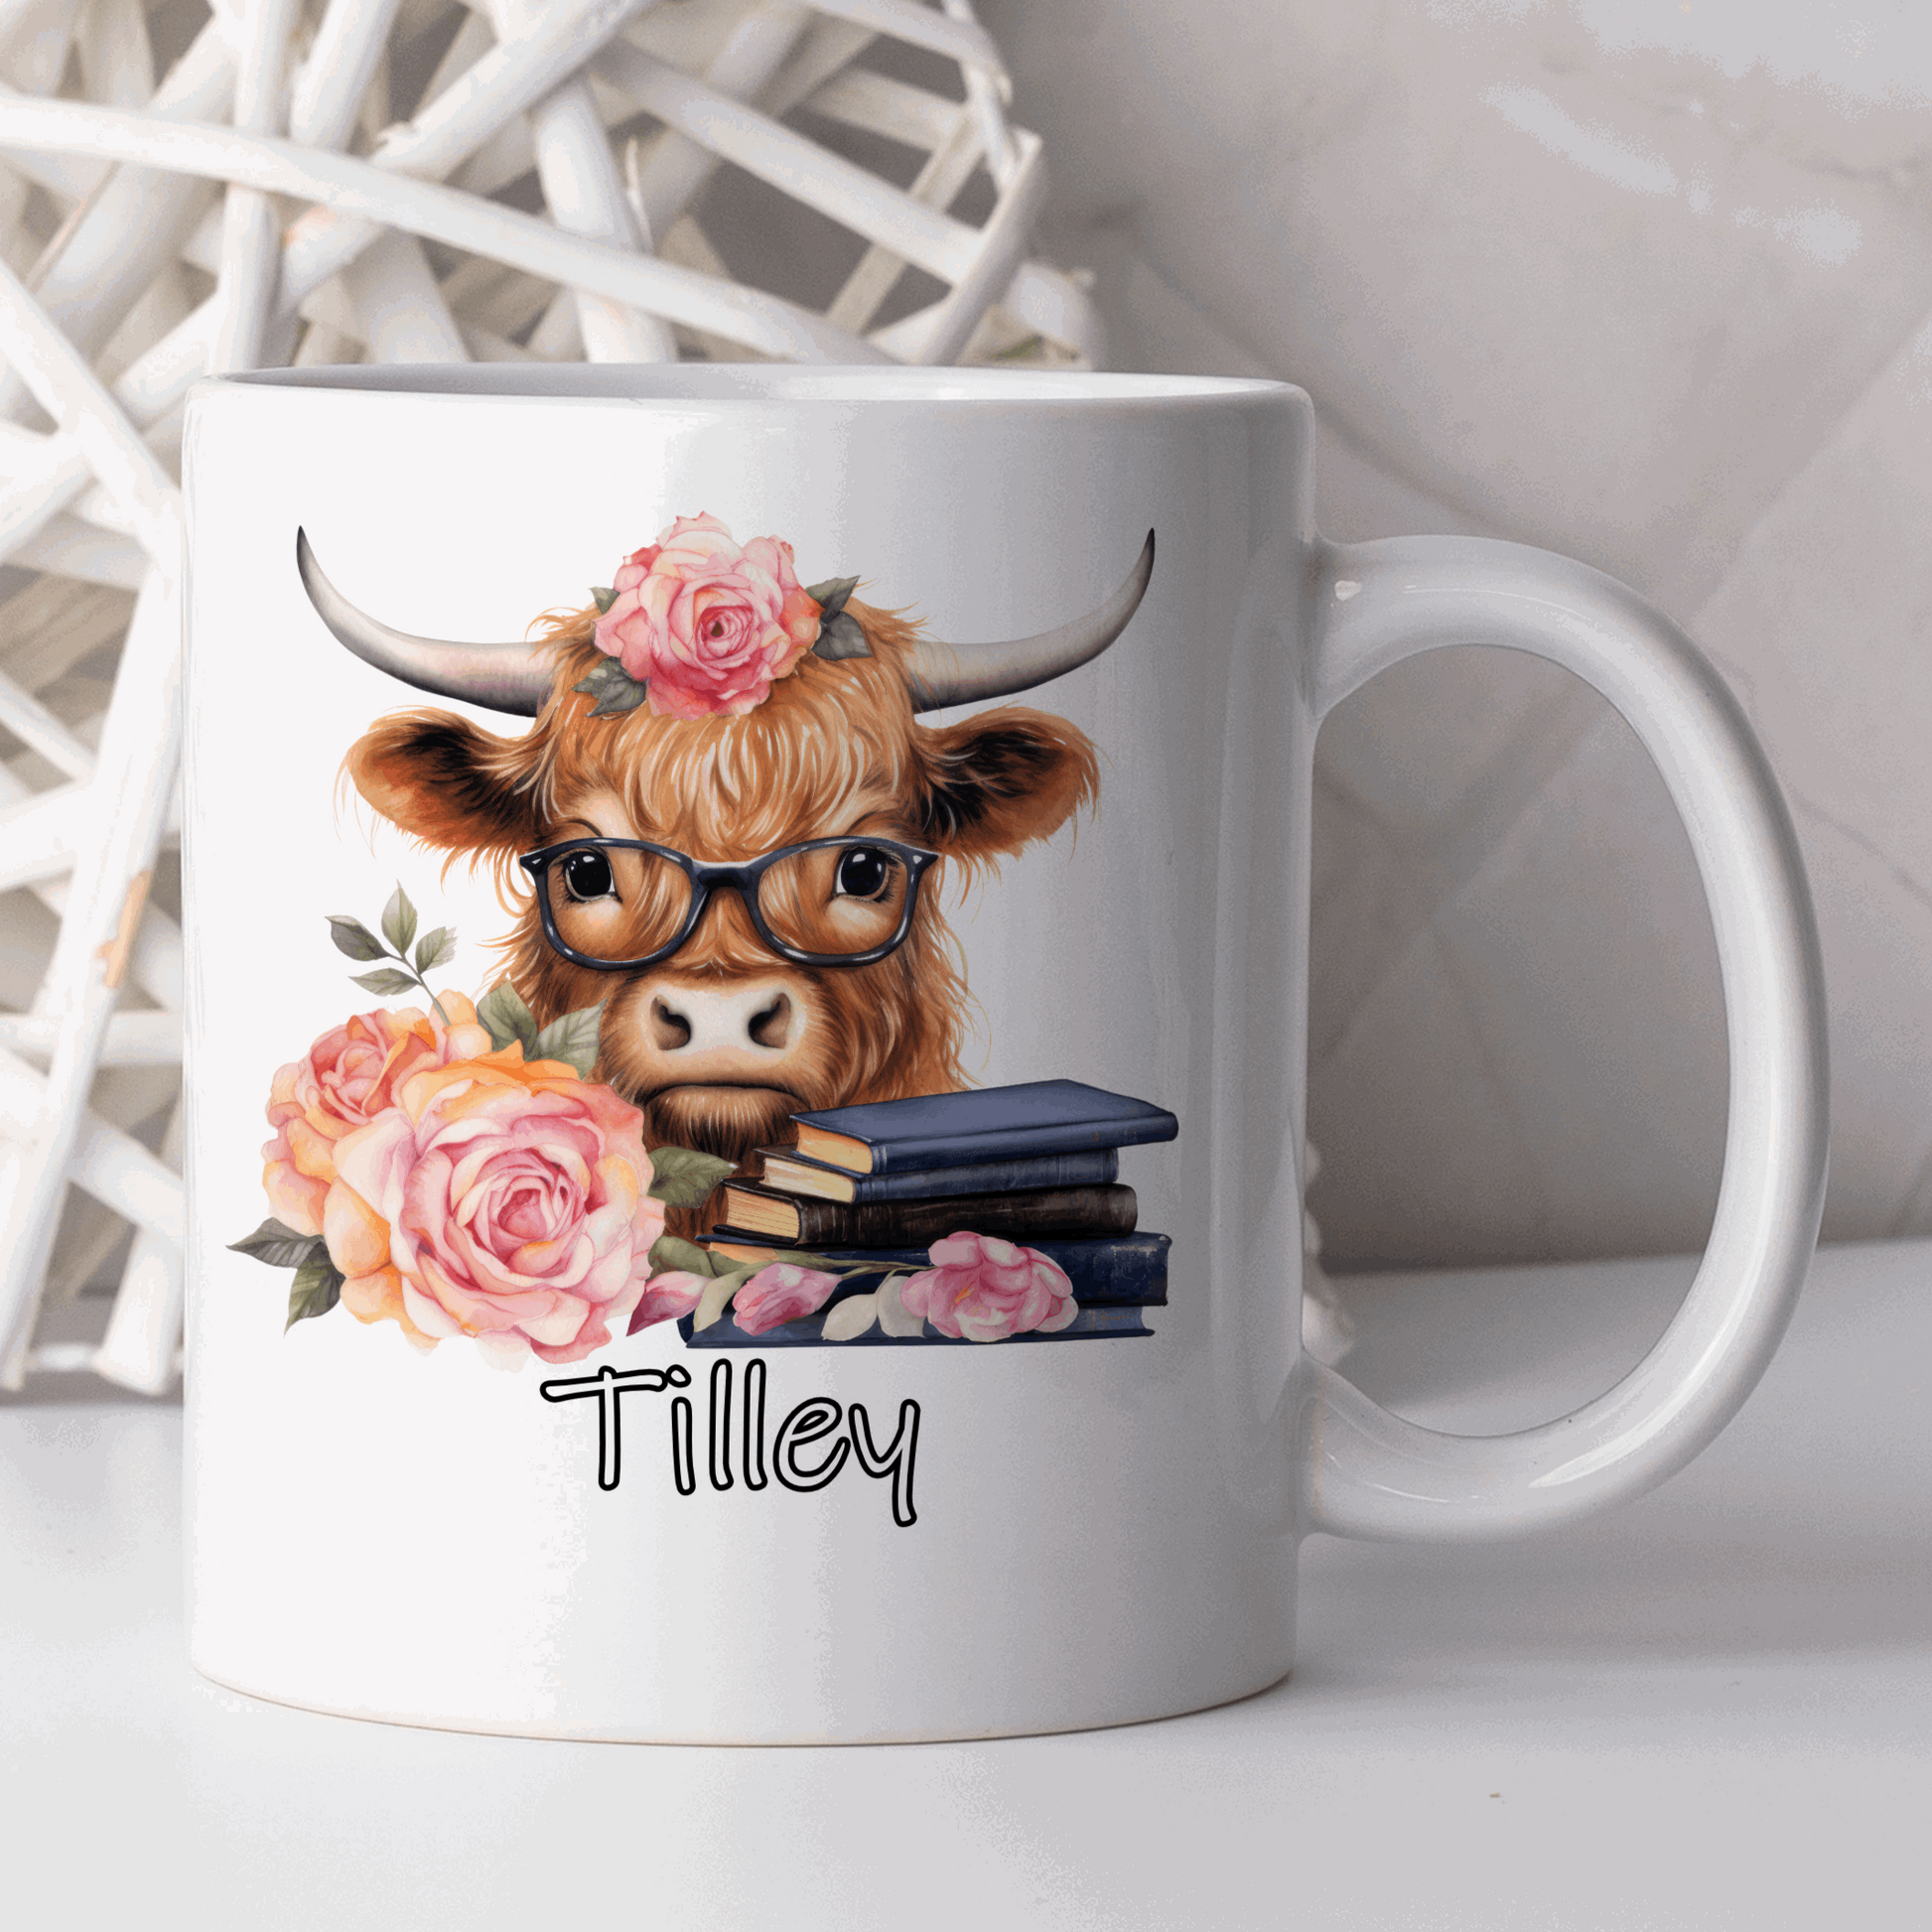 Highland cow personalised mug, quirky gift ideas, christmas personalised gifts to give